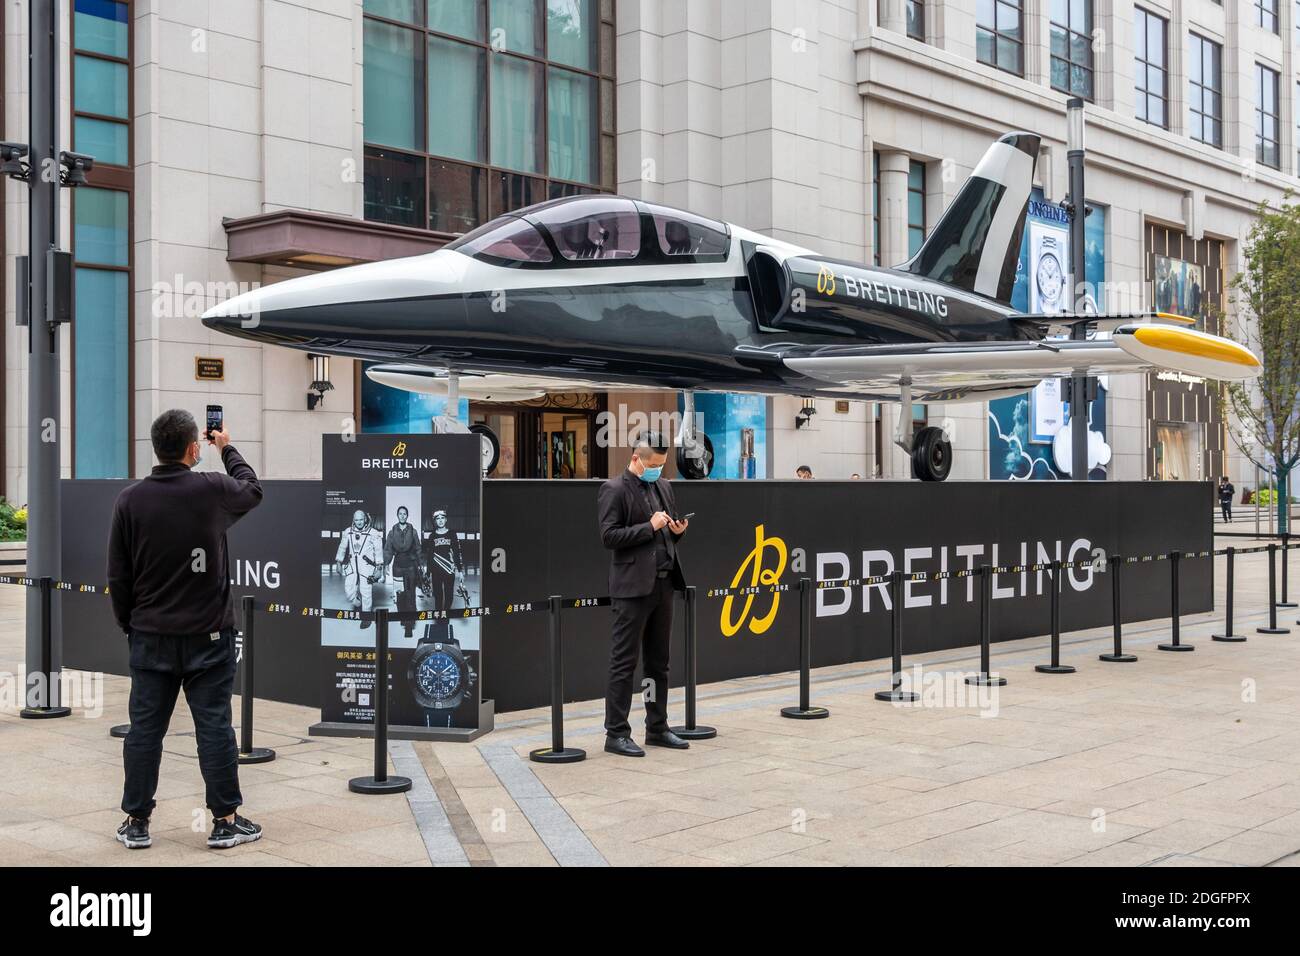 A L-39 Albatros, a high-performance jet trainer developed by Aero Vodochody is exhibited outside a mall during a promotional event of Breitling SA, a Stock Photo